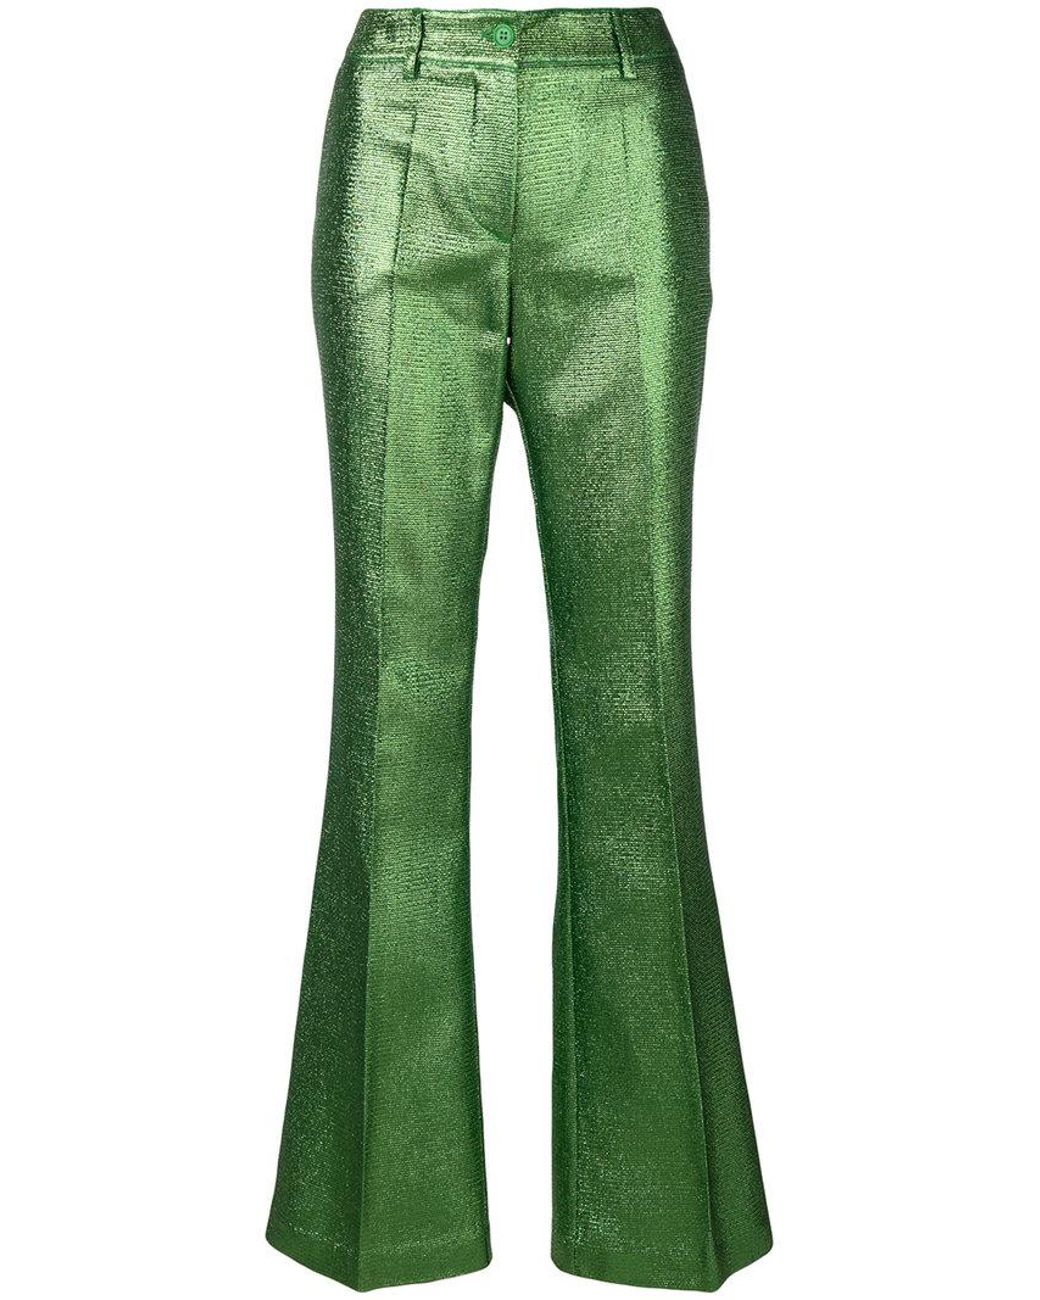 P.A.R.O.S.H Slacks and Chinos P.A.R.O.S.H Trousers Houndstooth Flared Trousers in Green Slacks and Chinos Womens Trousers 